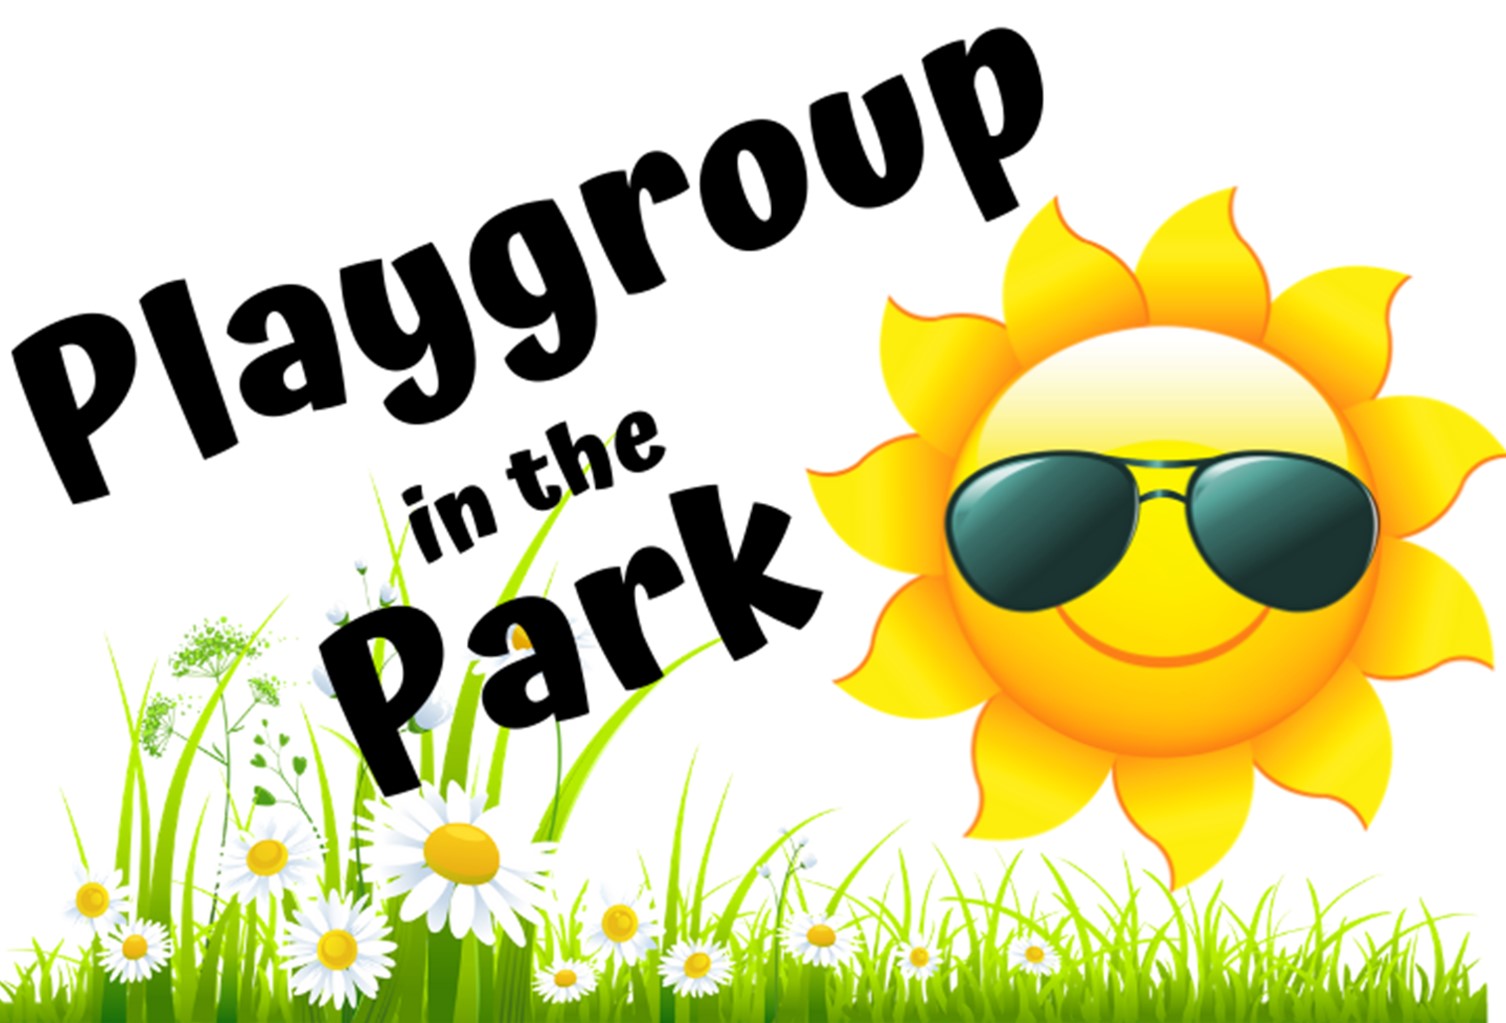 Playgroup in the Park